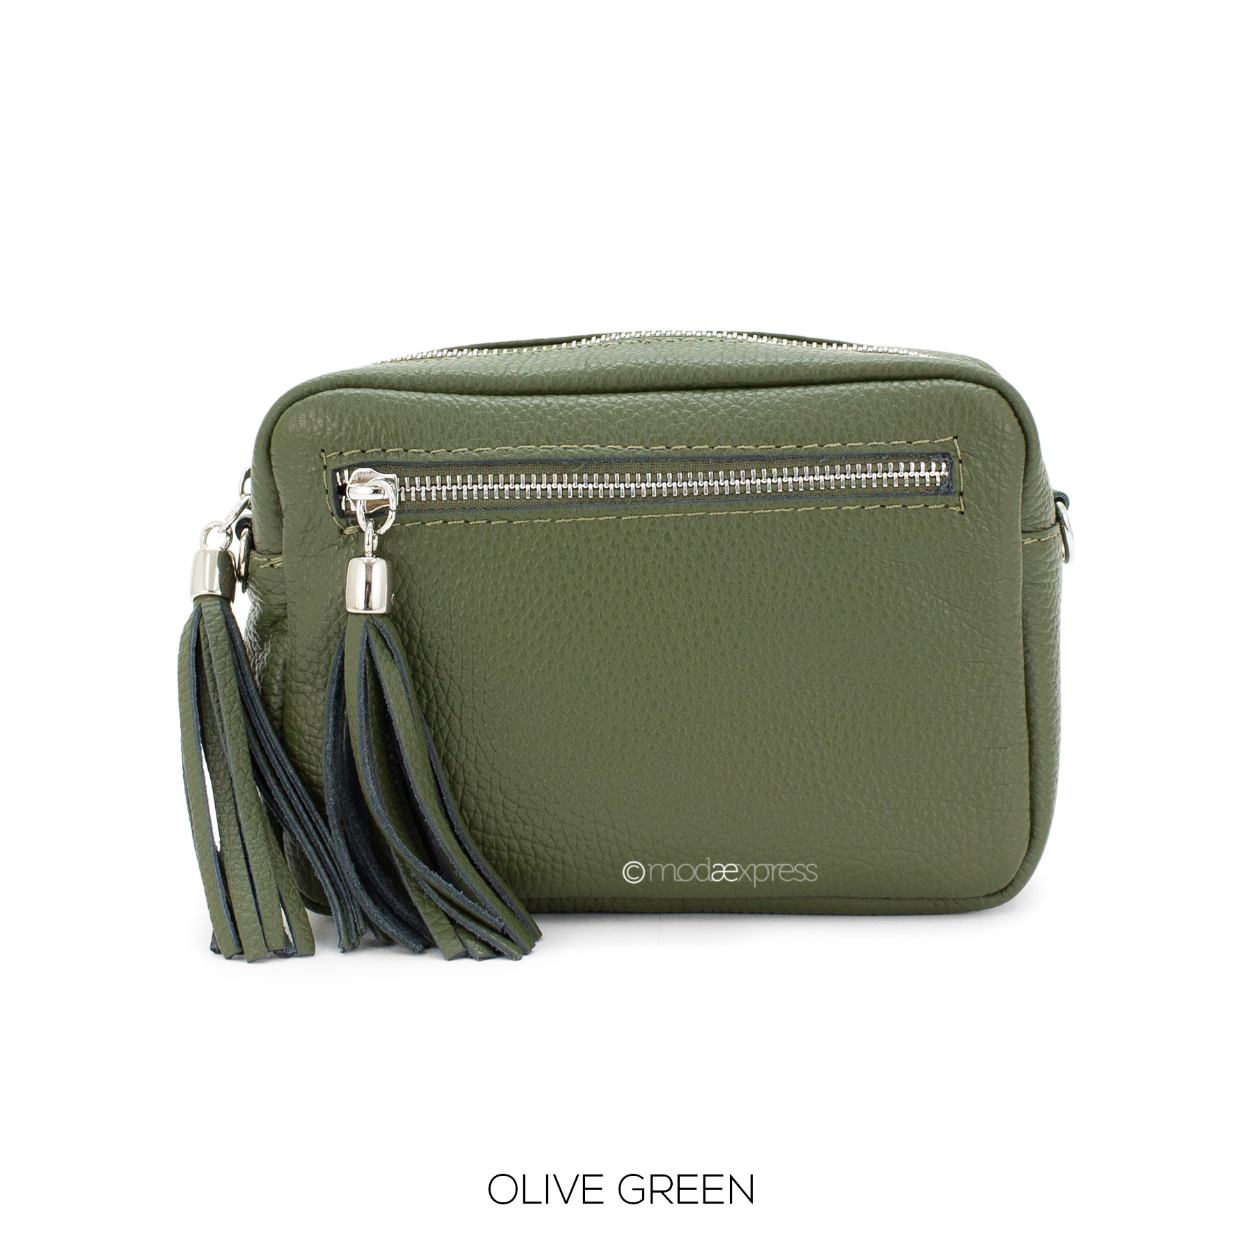 Leather Crossbody Bag - Olive Green - With Detachable Strap